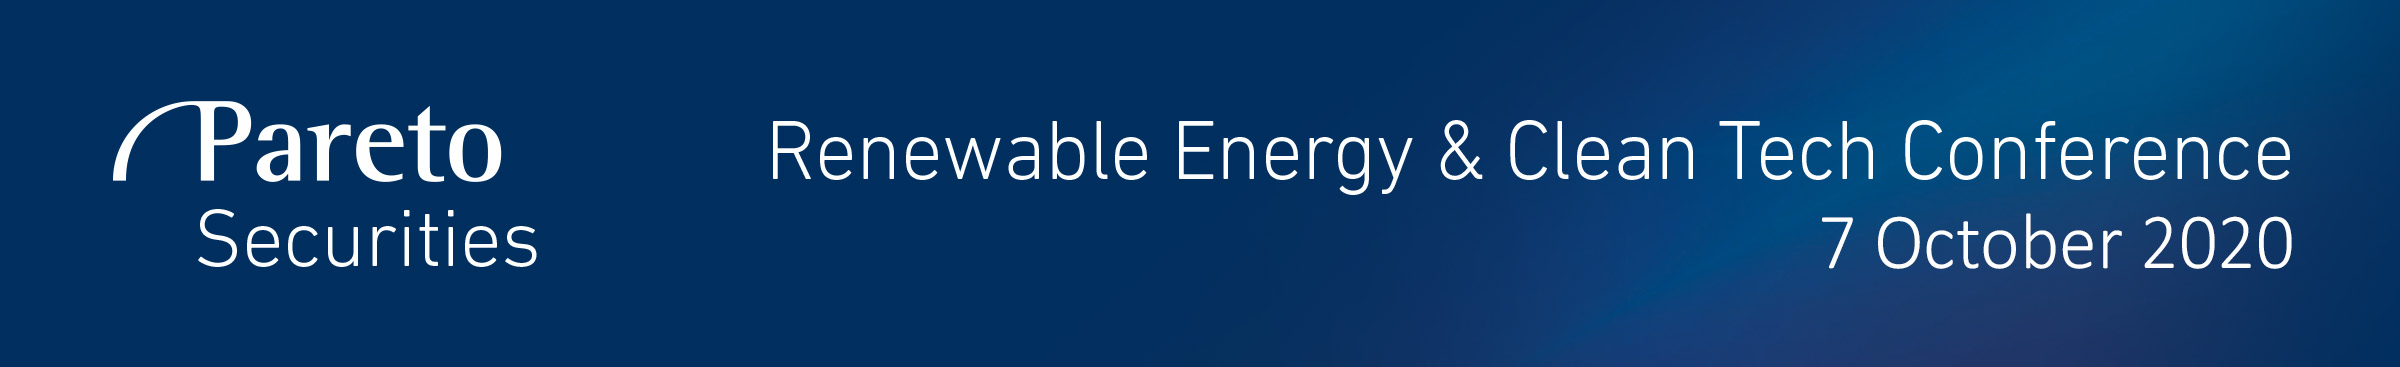 Header image for Pareto Securities' Renewable Energy & Clean Tech Conference